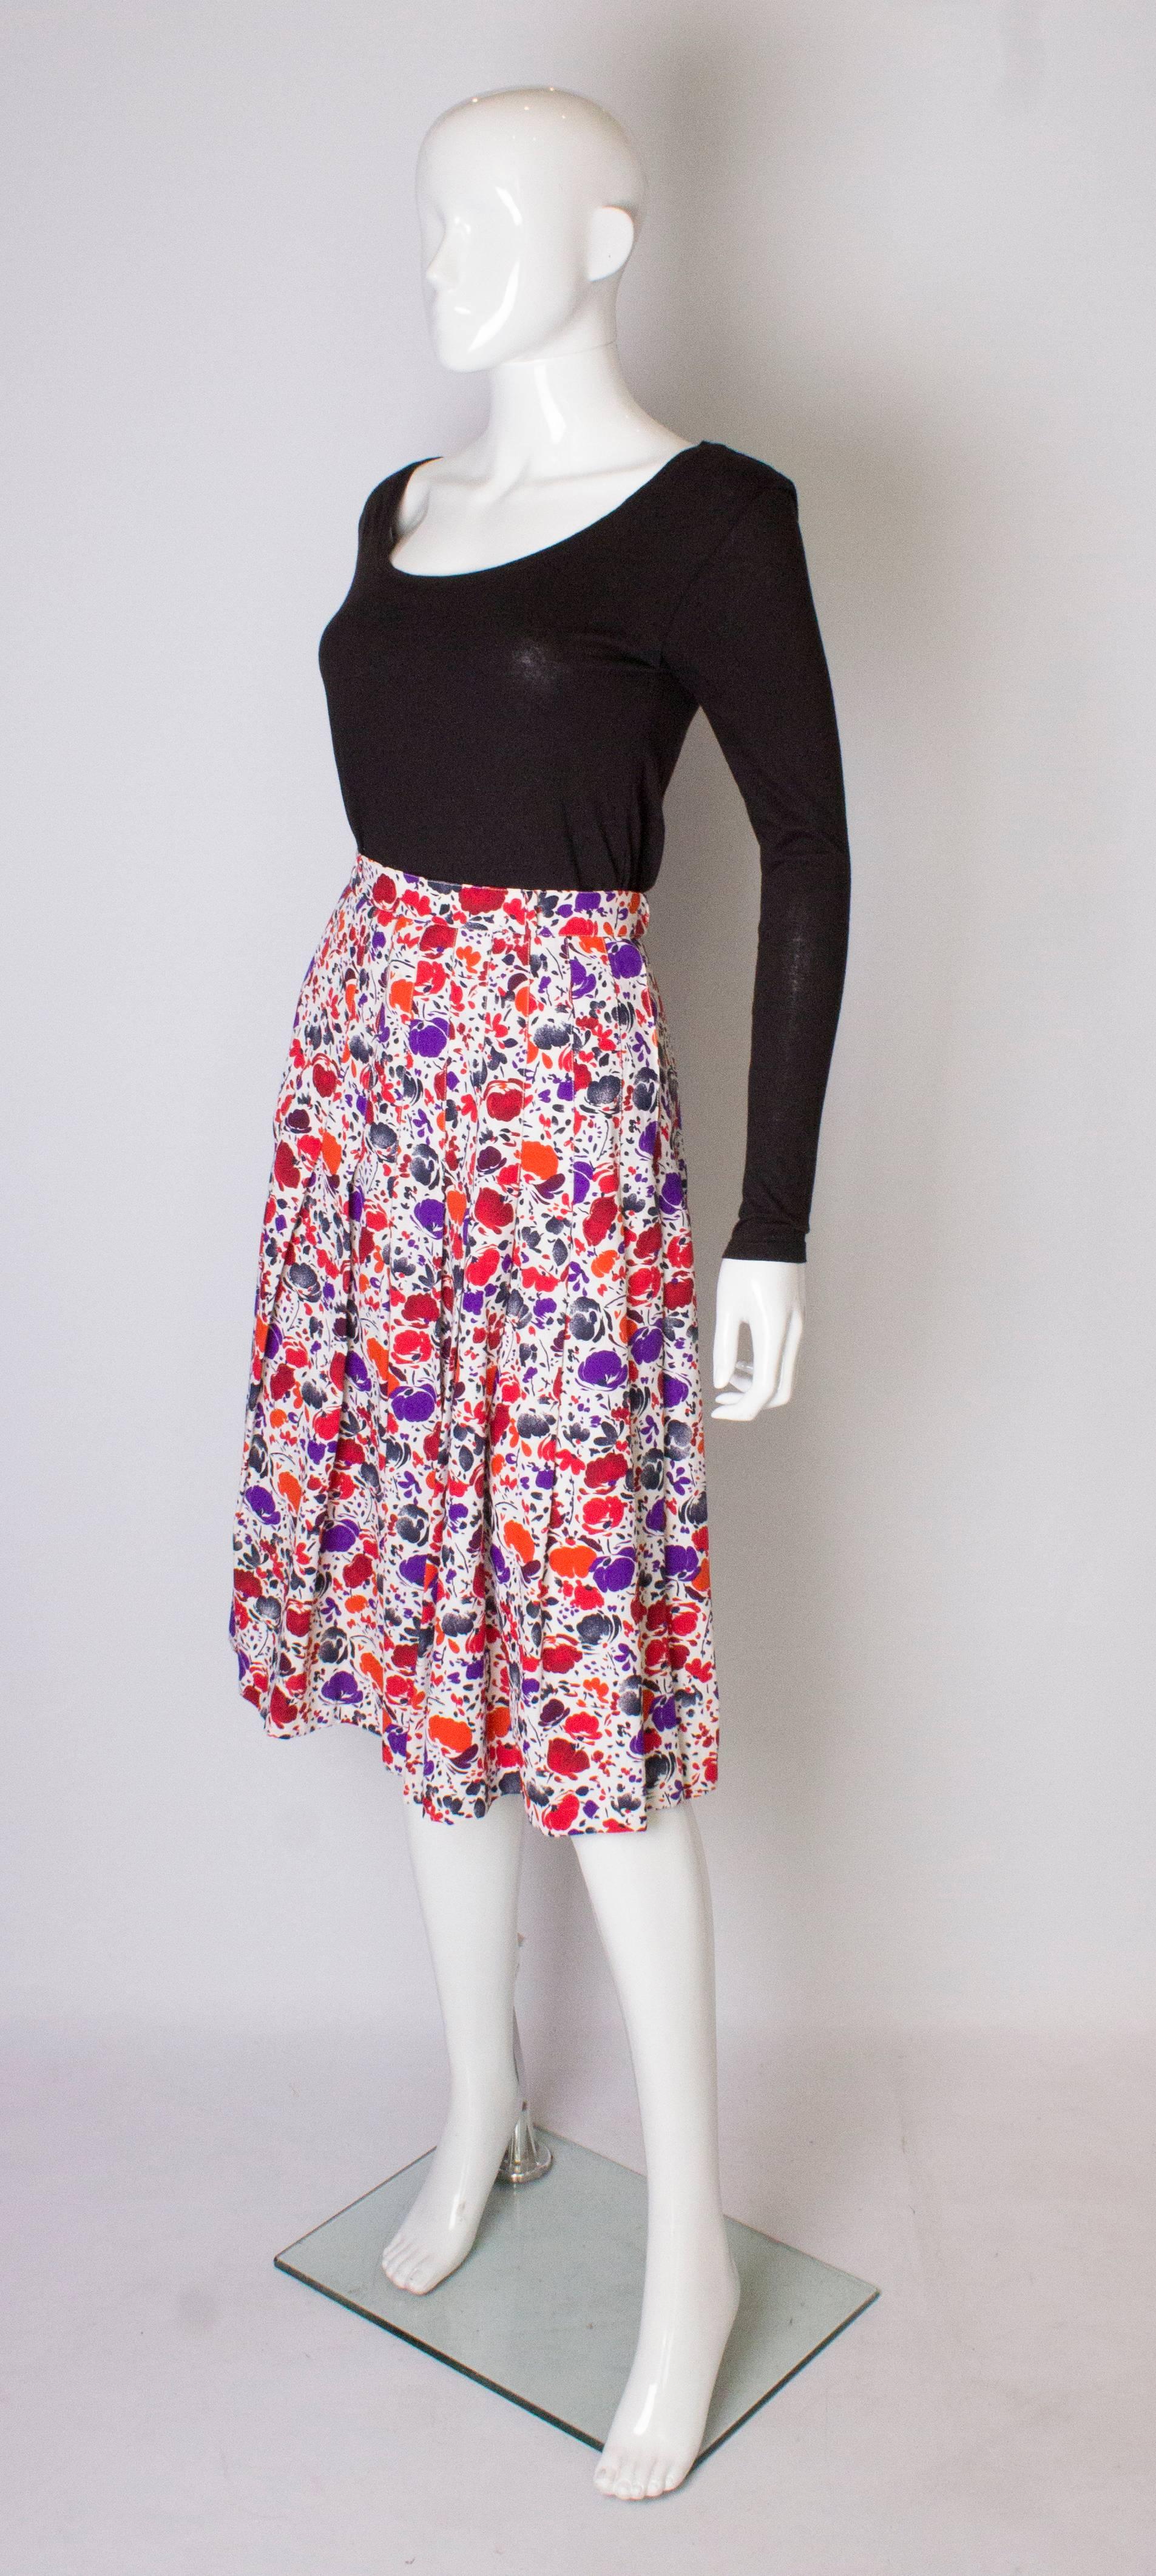 Gray A vintage 1980s floral printed pleated numbered Skirt by Jean Louis Scherer